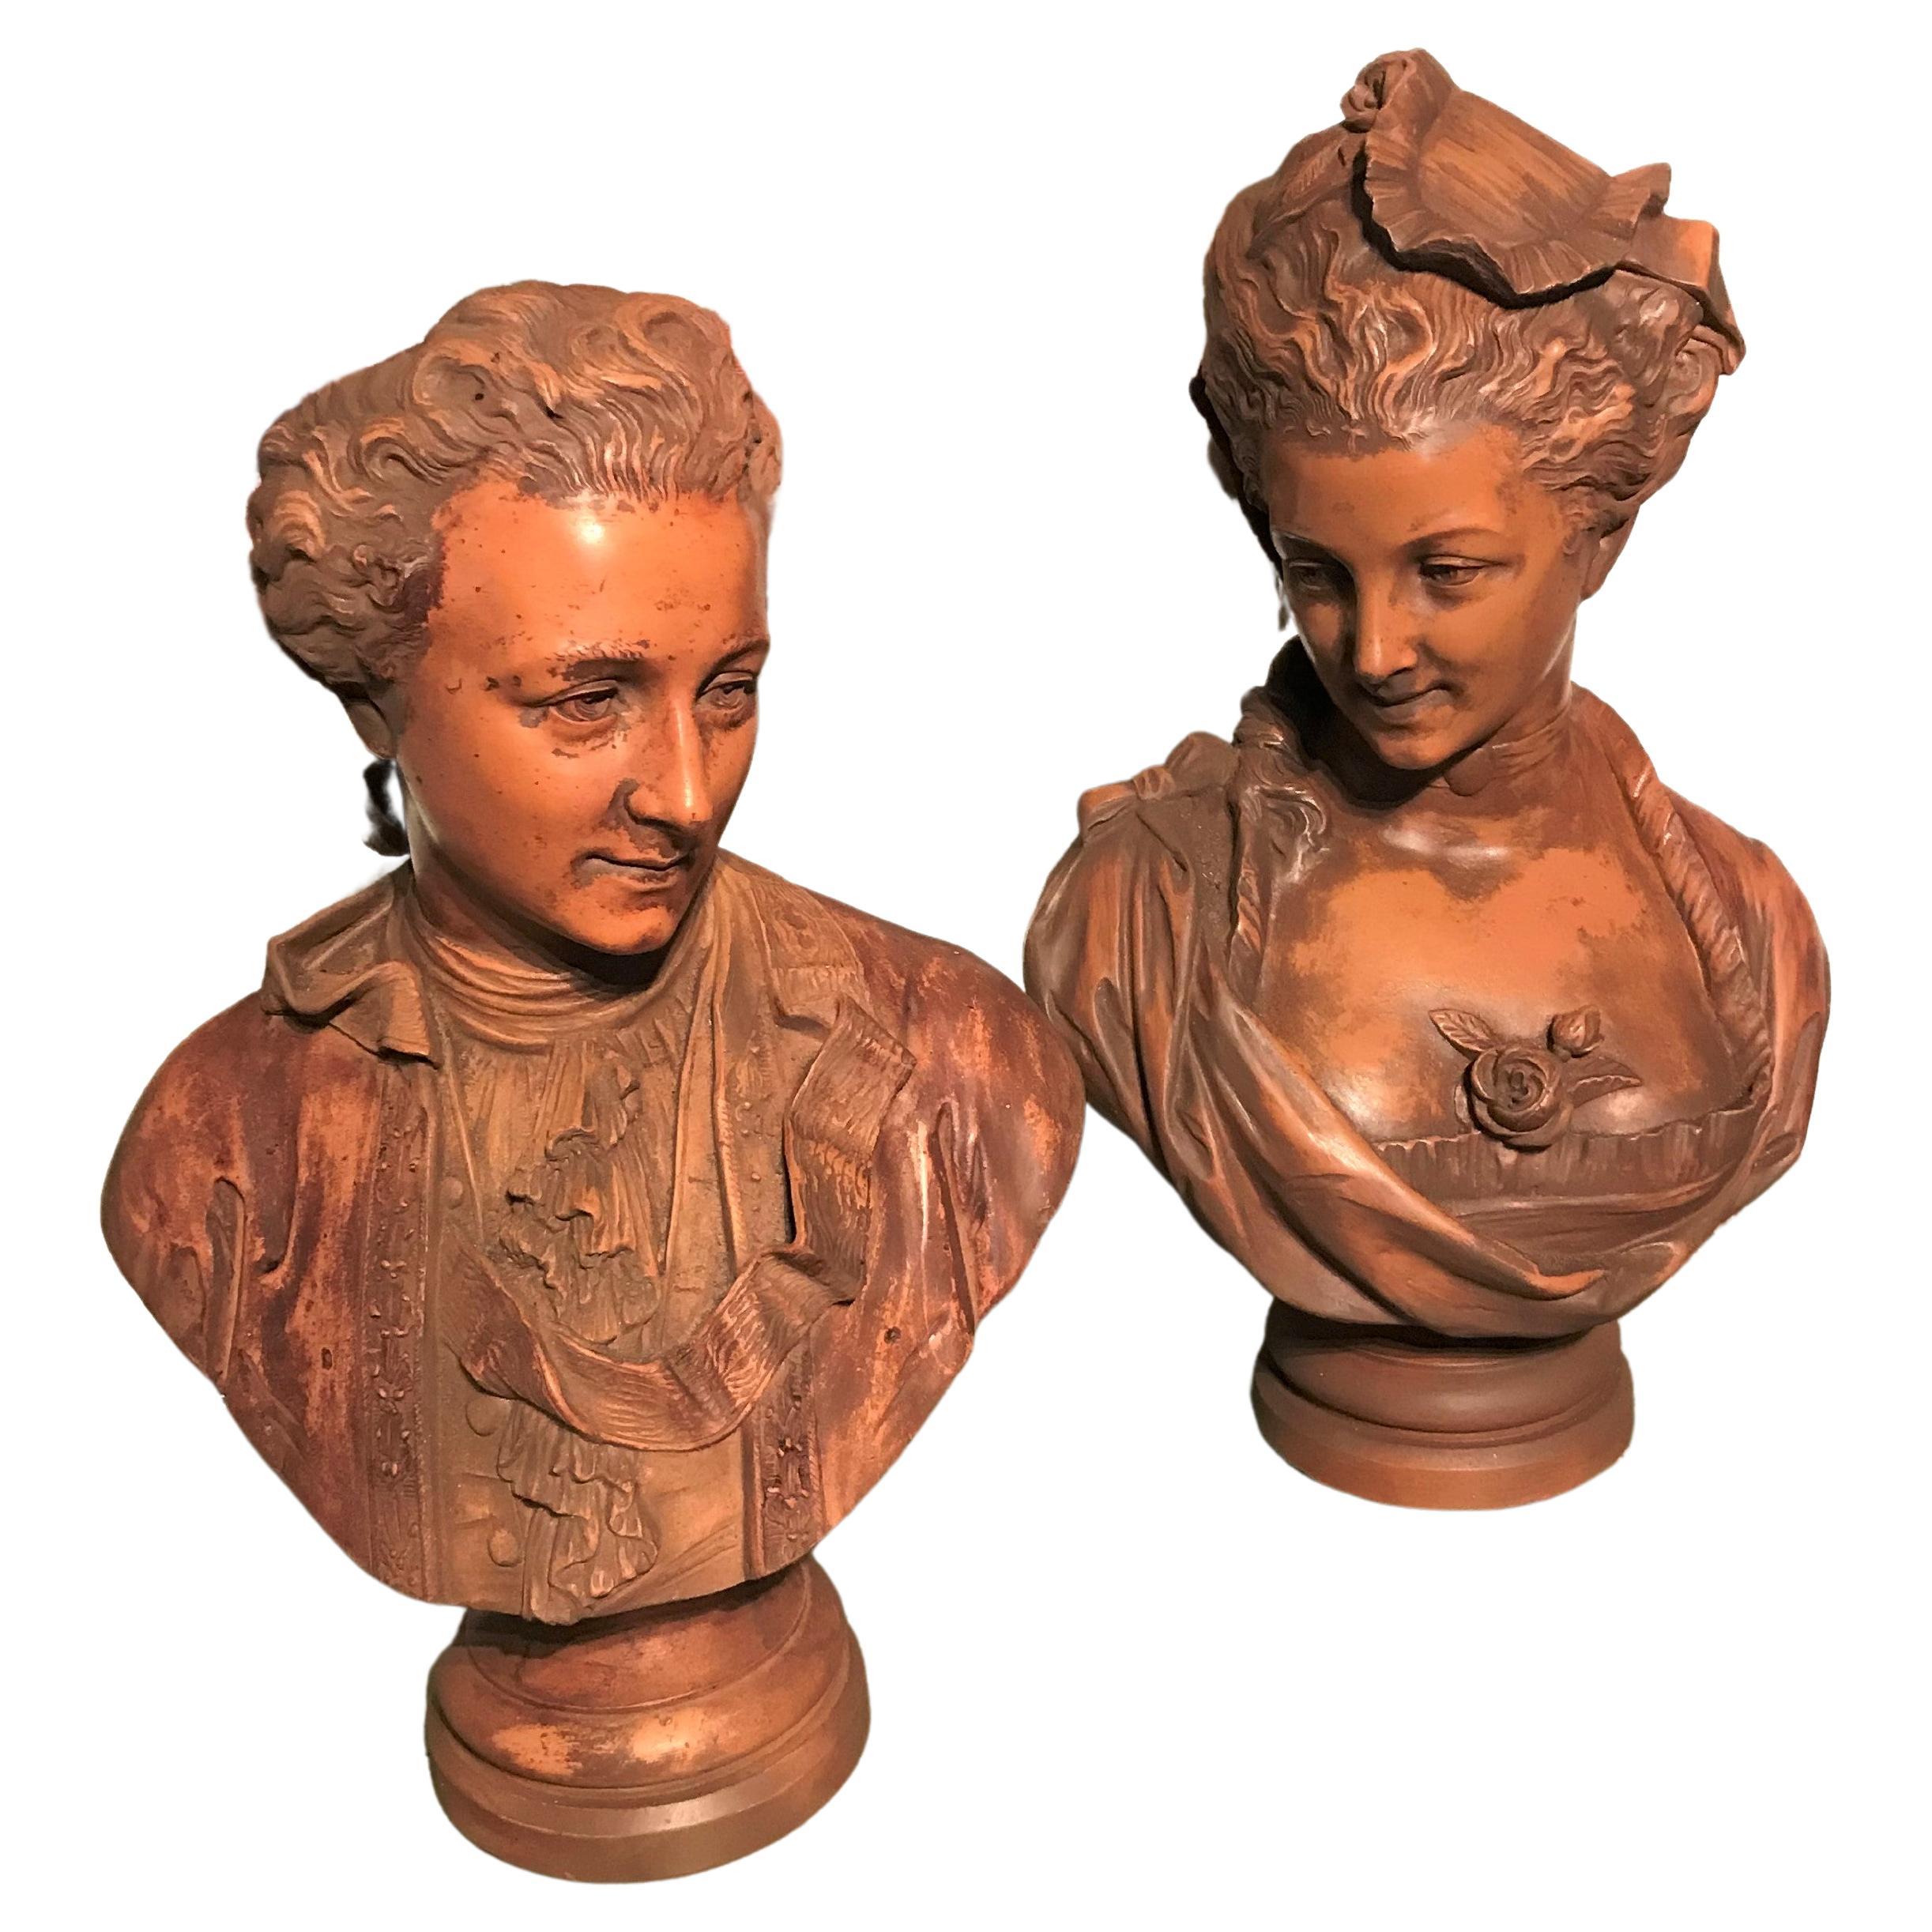 Trust lawyers instruct a sale . Busts possibly depicting young  Marie Antoinette and Louis Xvi i(or in turn possibly just a pair of young aristocrats ) in terracotta with very fine polished patina on neoclassical fluted and detailed pedestals .